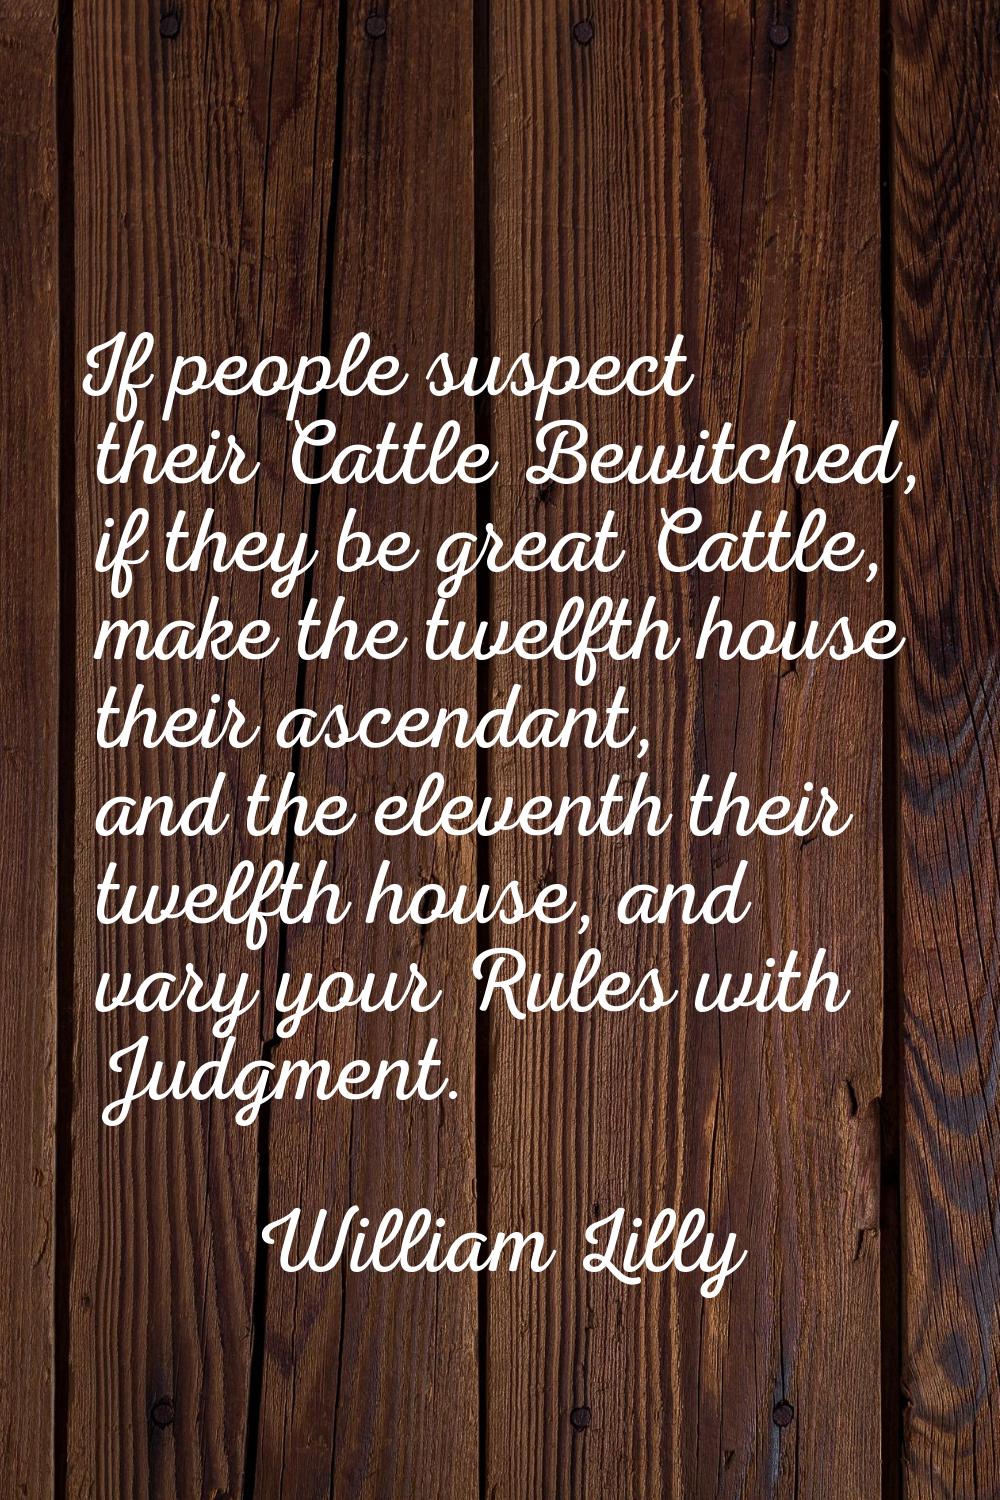 If people suspect their Cattle Bewitched, if they be great Cattle, make the twelfth house their asc